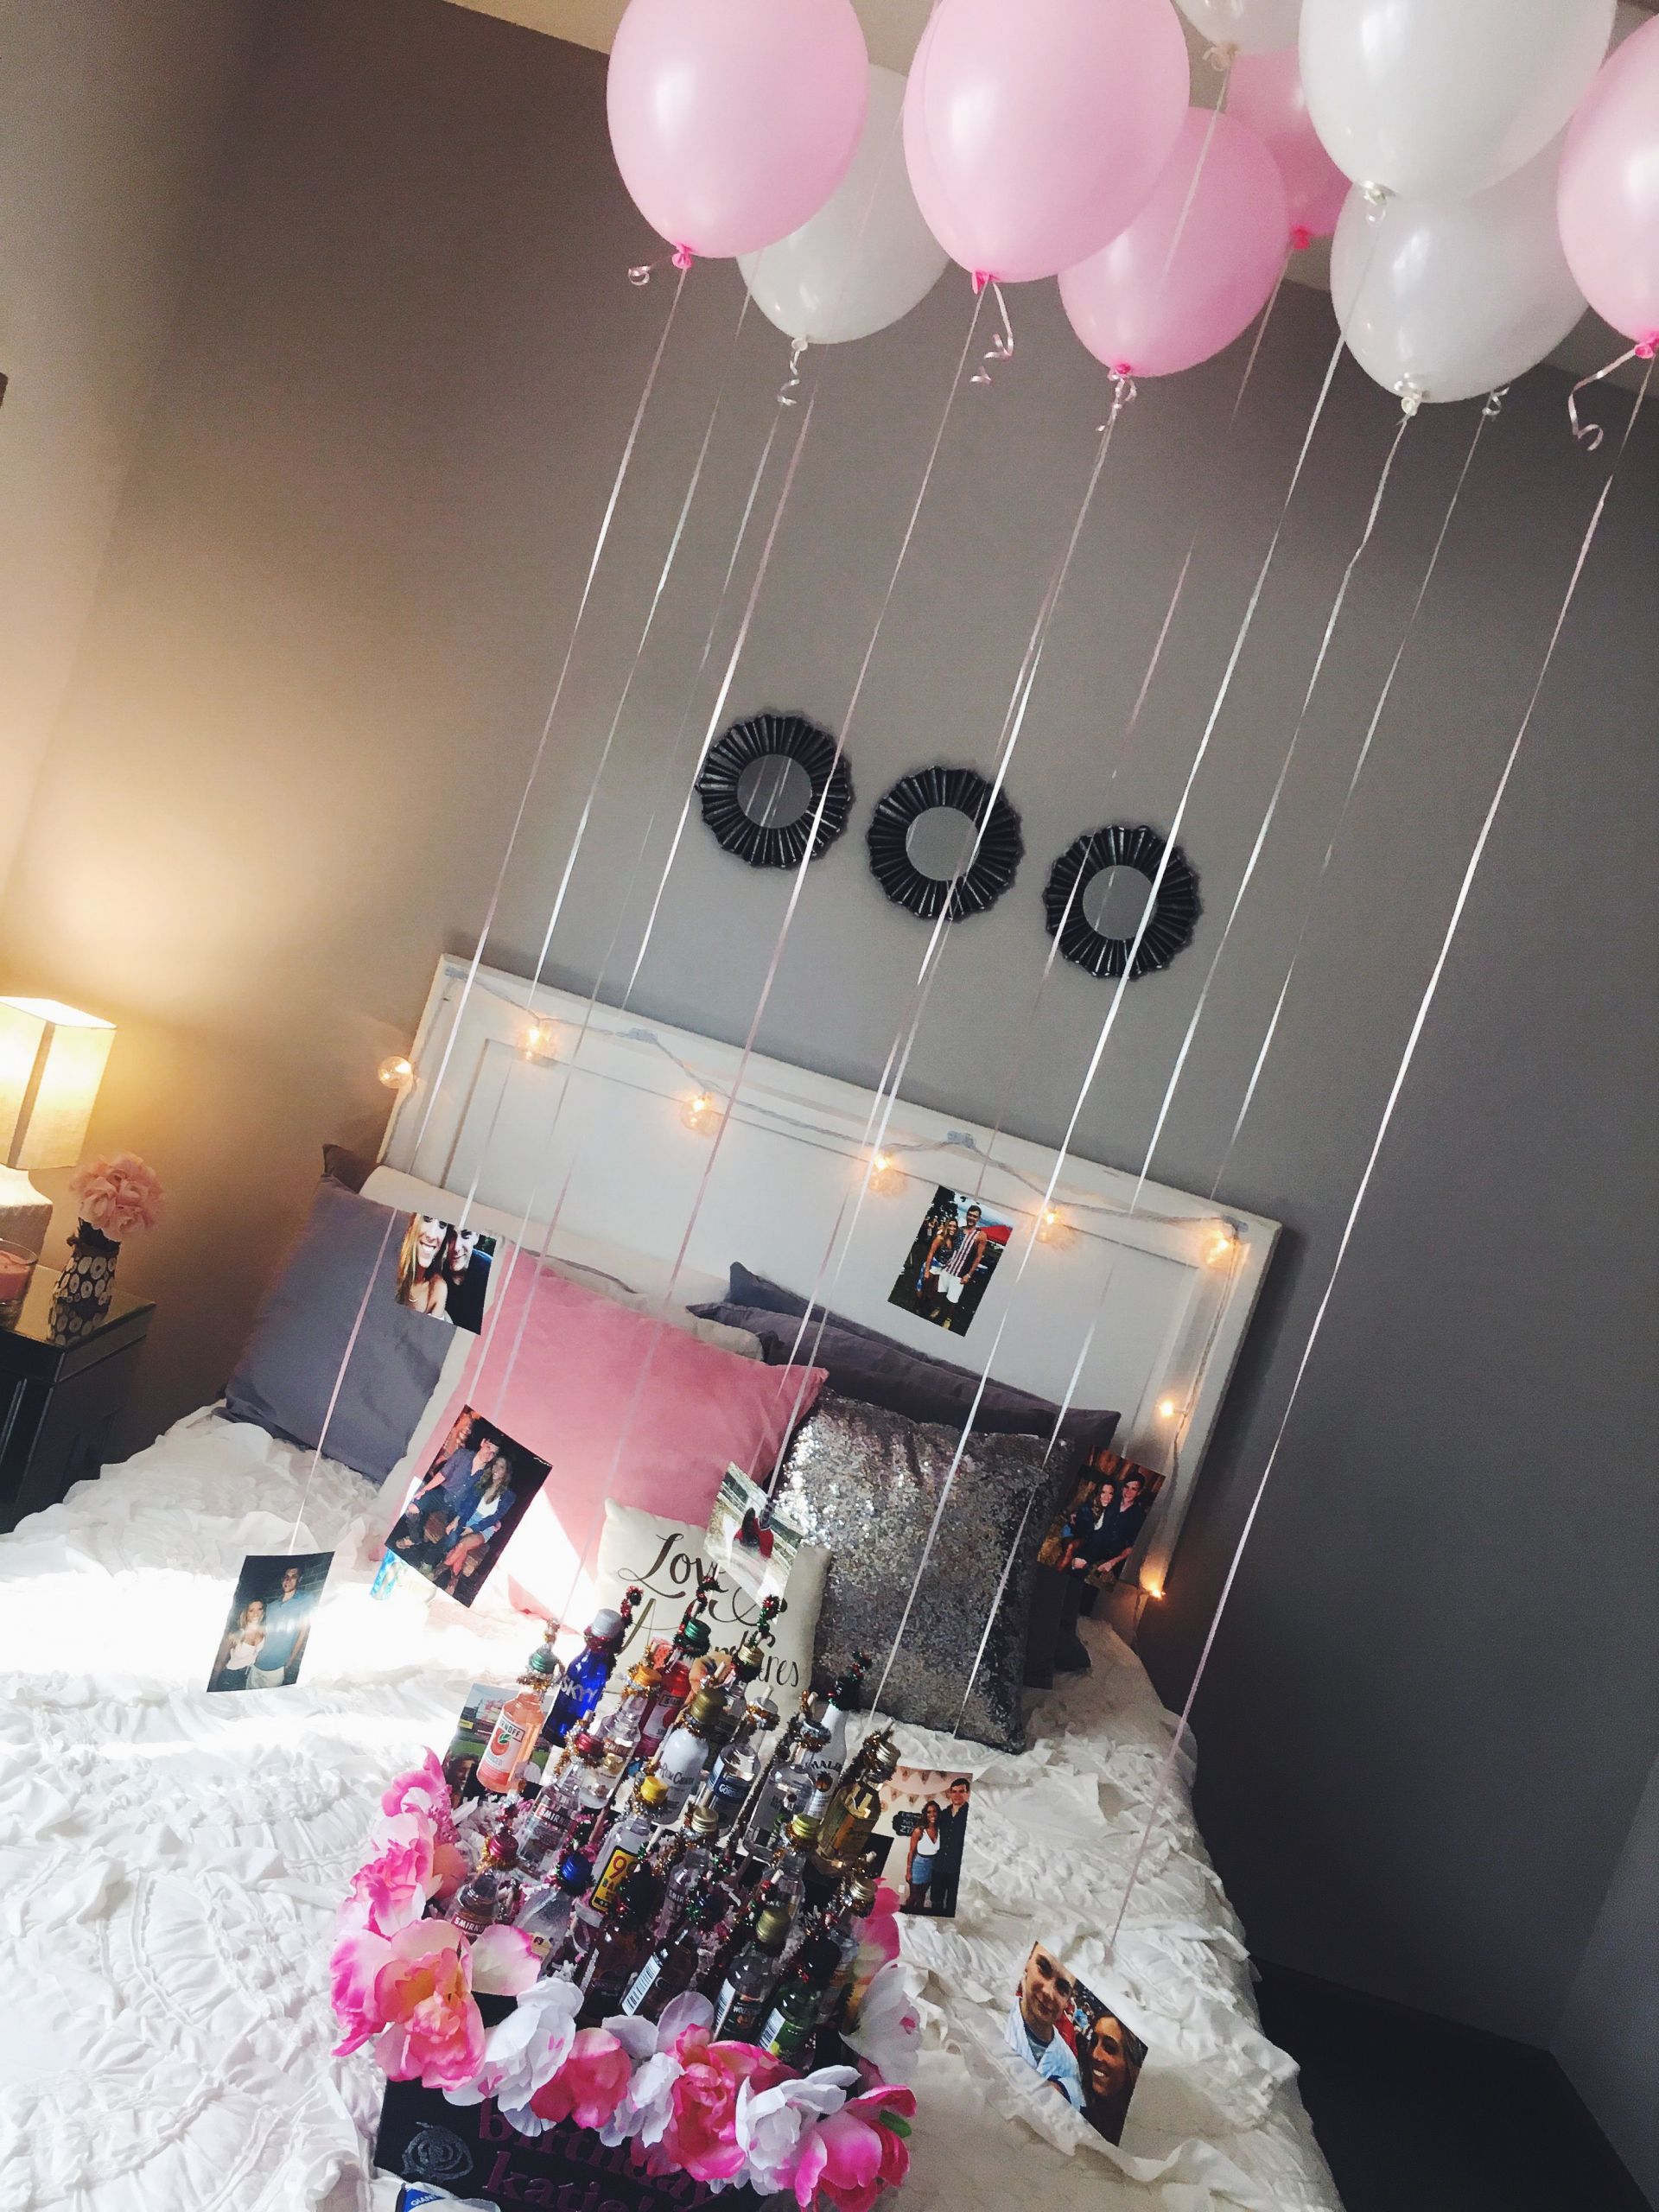 Girlfriend Birthday Gift Ideas Romantic
 easy and cute decorations for a friend or girlfriends 21st